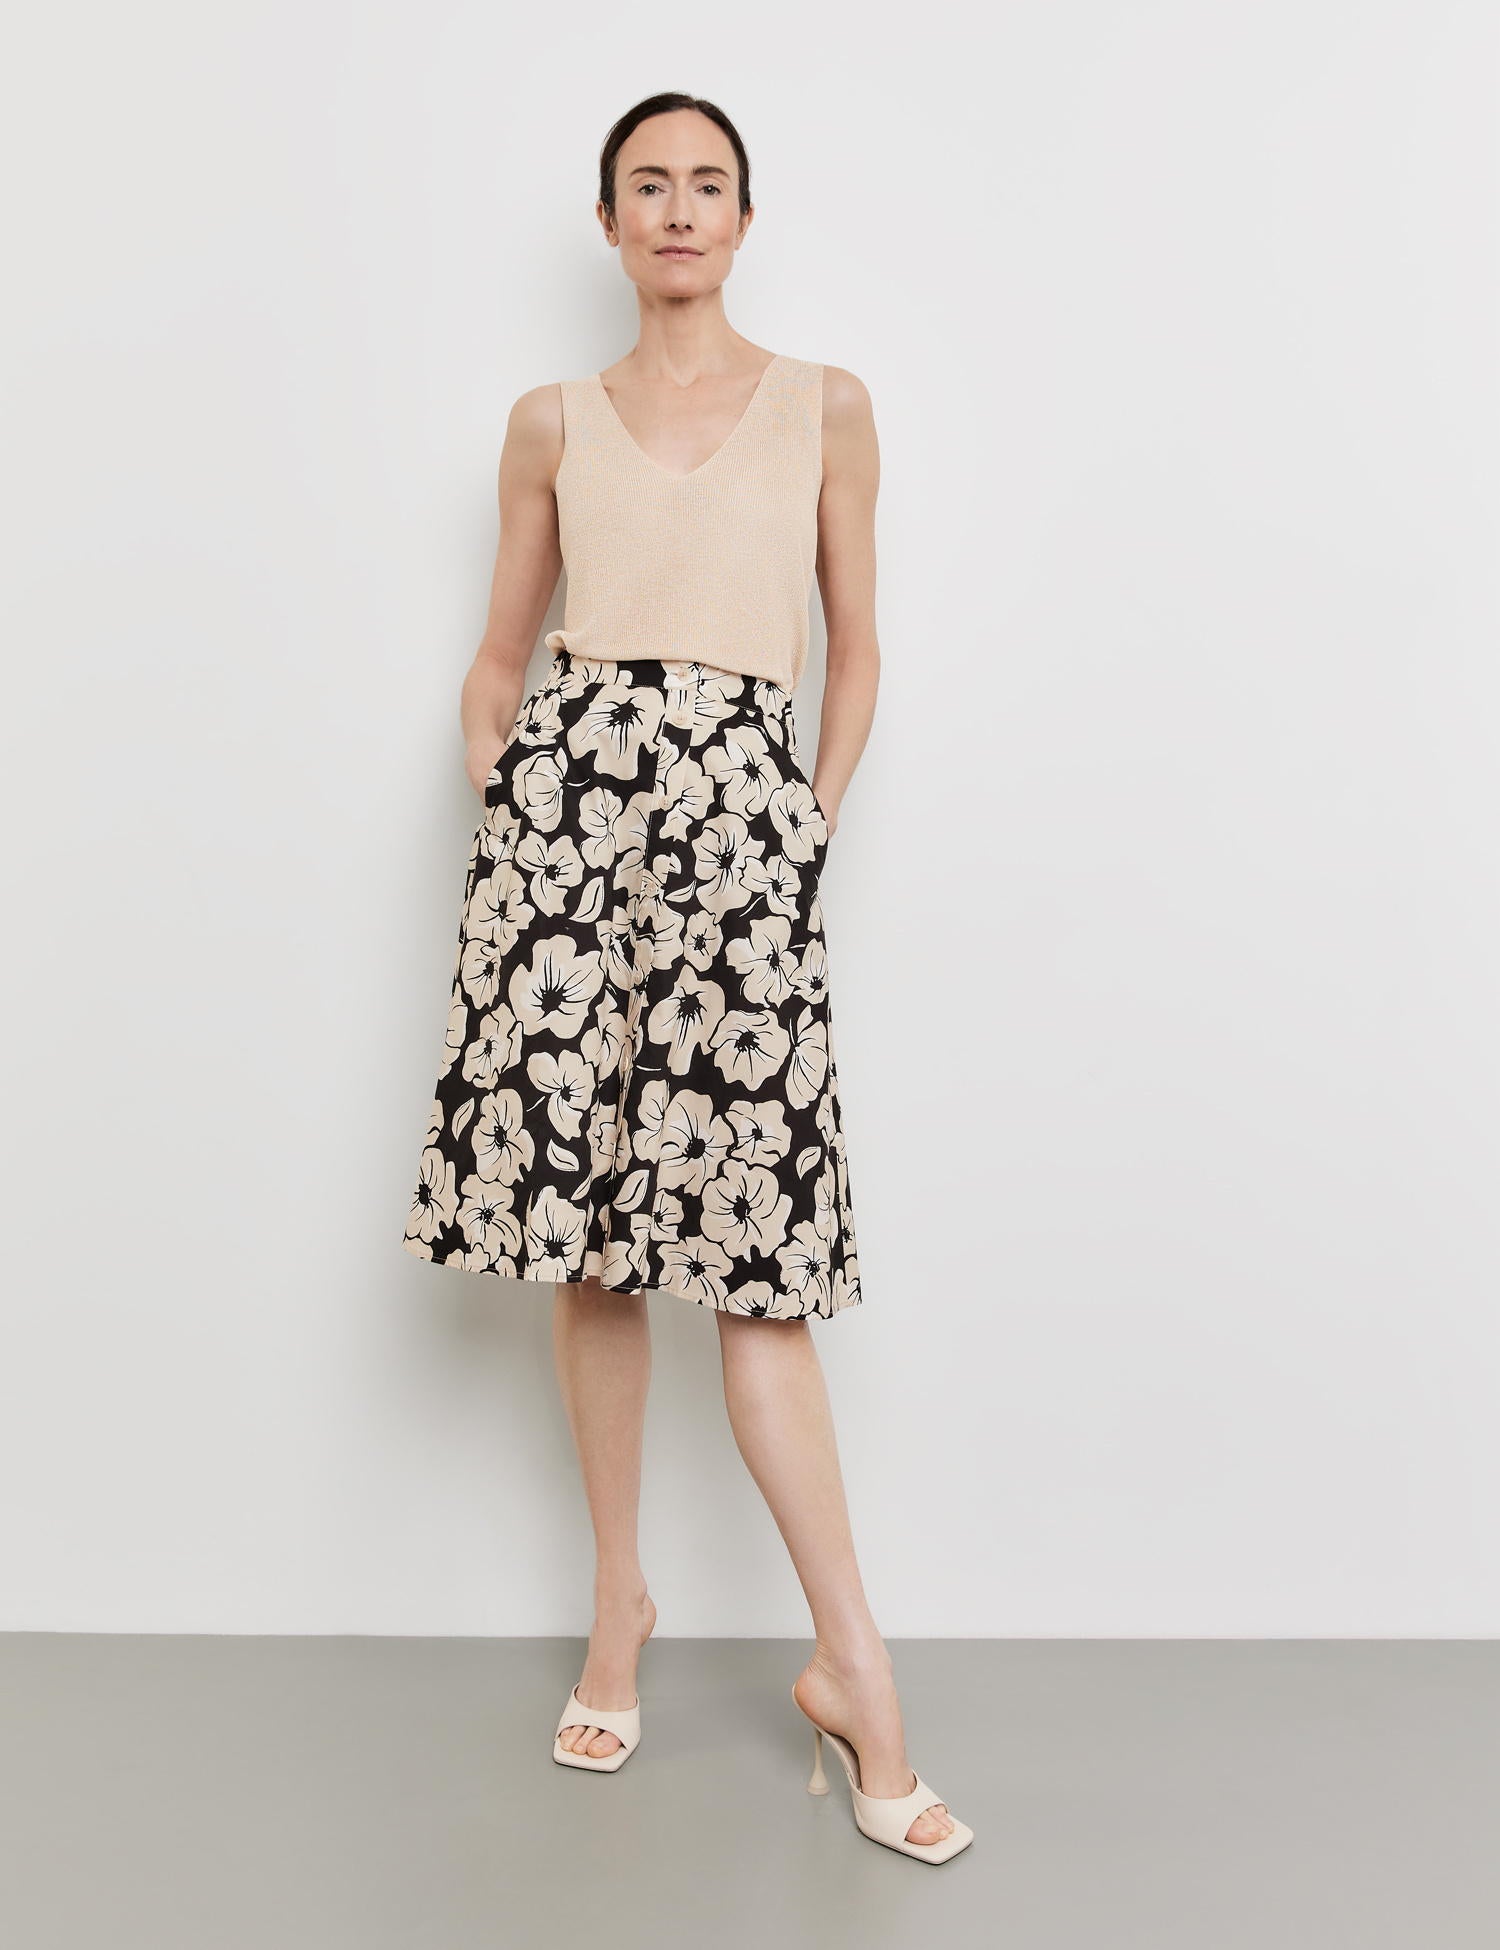 Midi Skirt With A Floral Pattern_310015-31511_1098_01